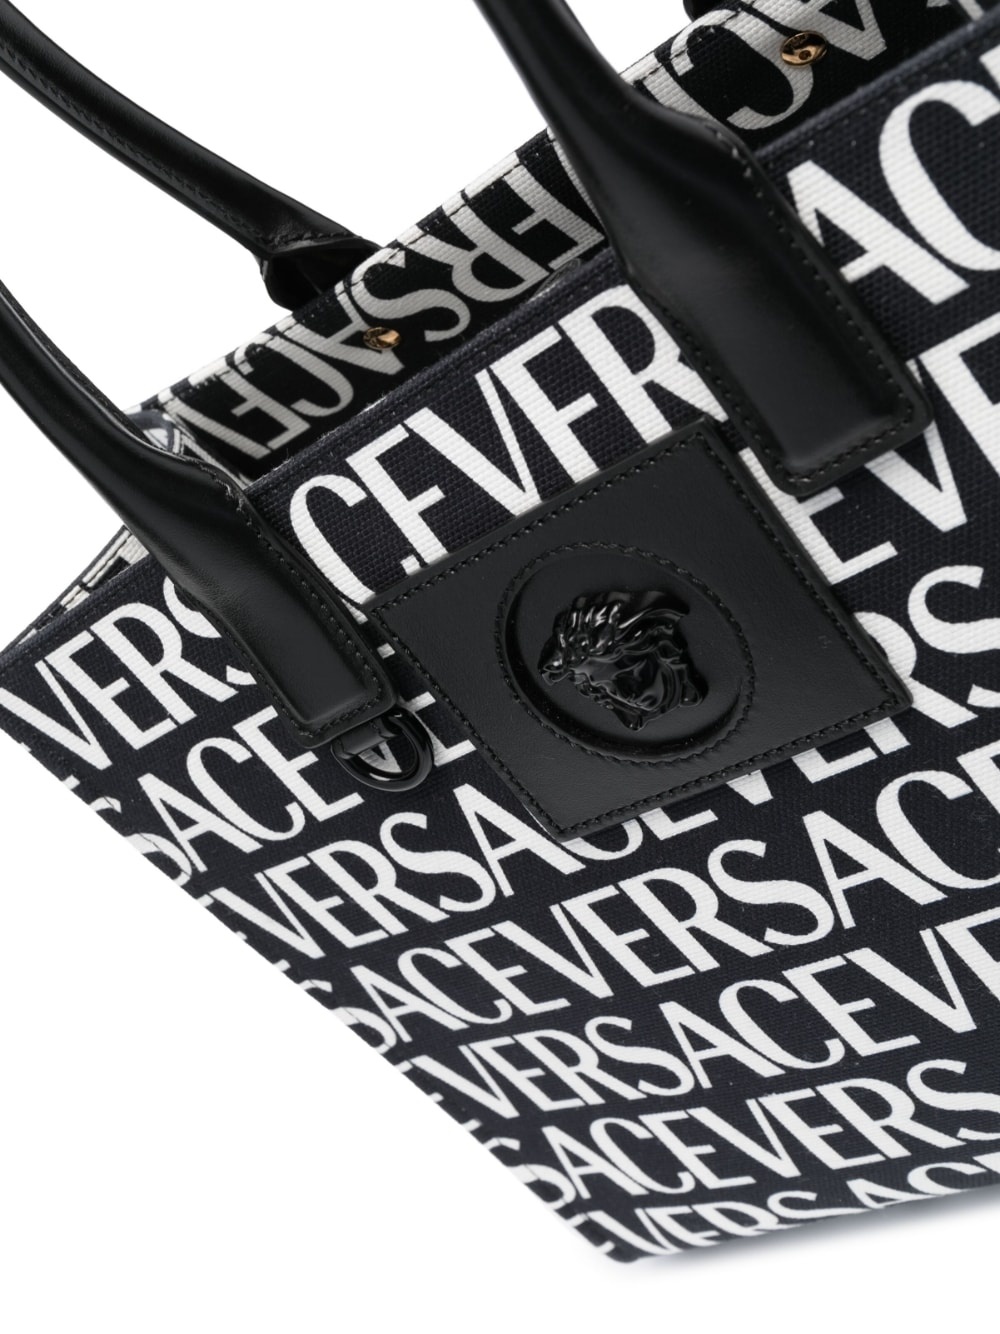 Versace All-Over Logo Small Tote Bag